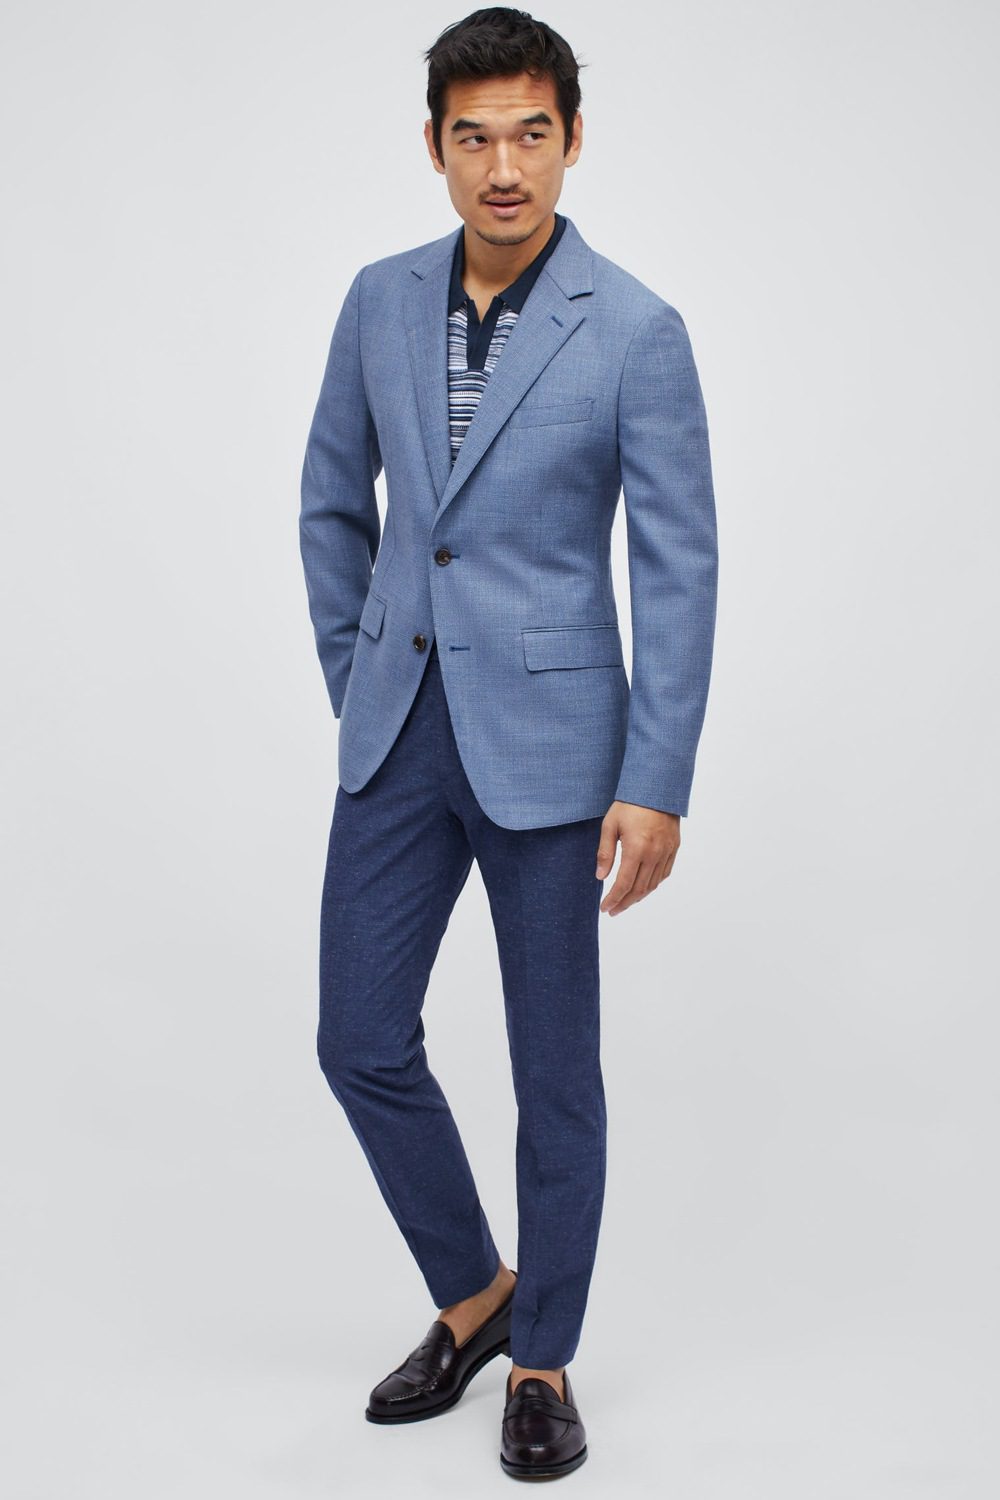 With blue a go blazer what pants 9 Best